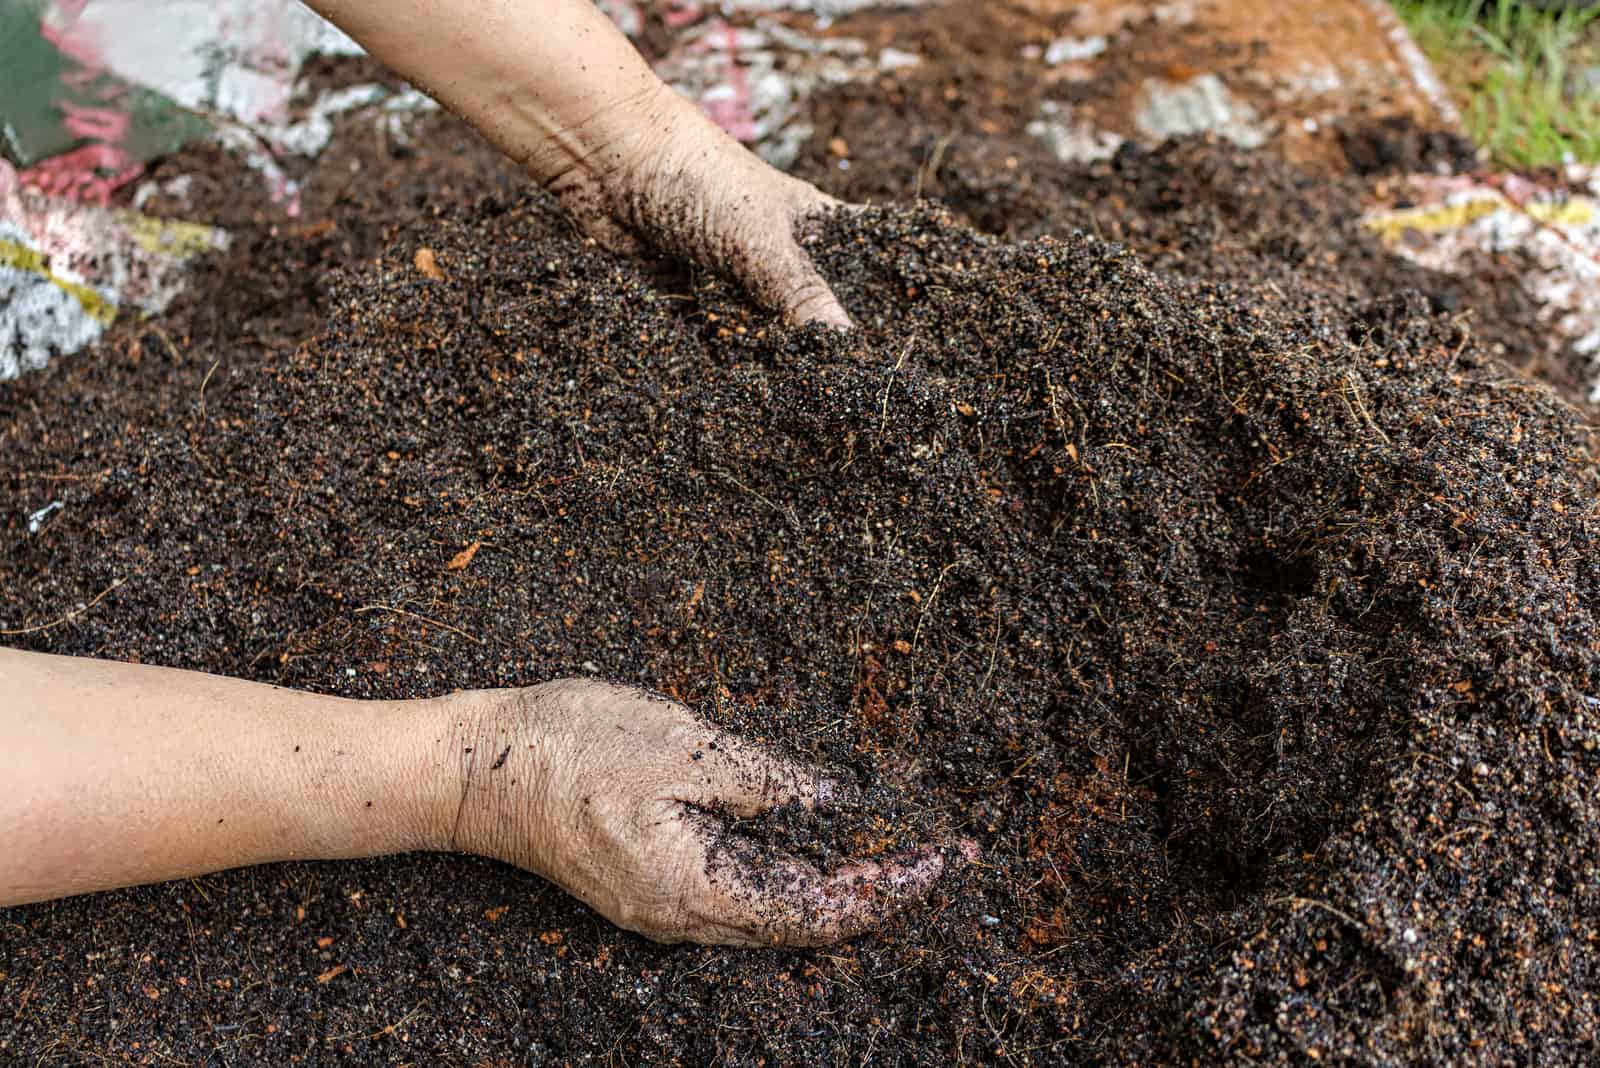 Mixing soil for cultivation by hand